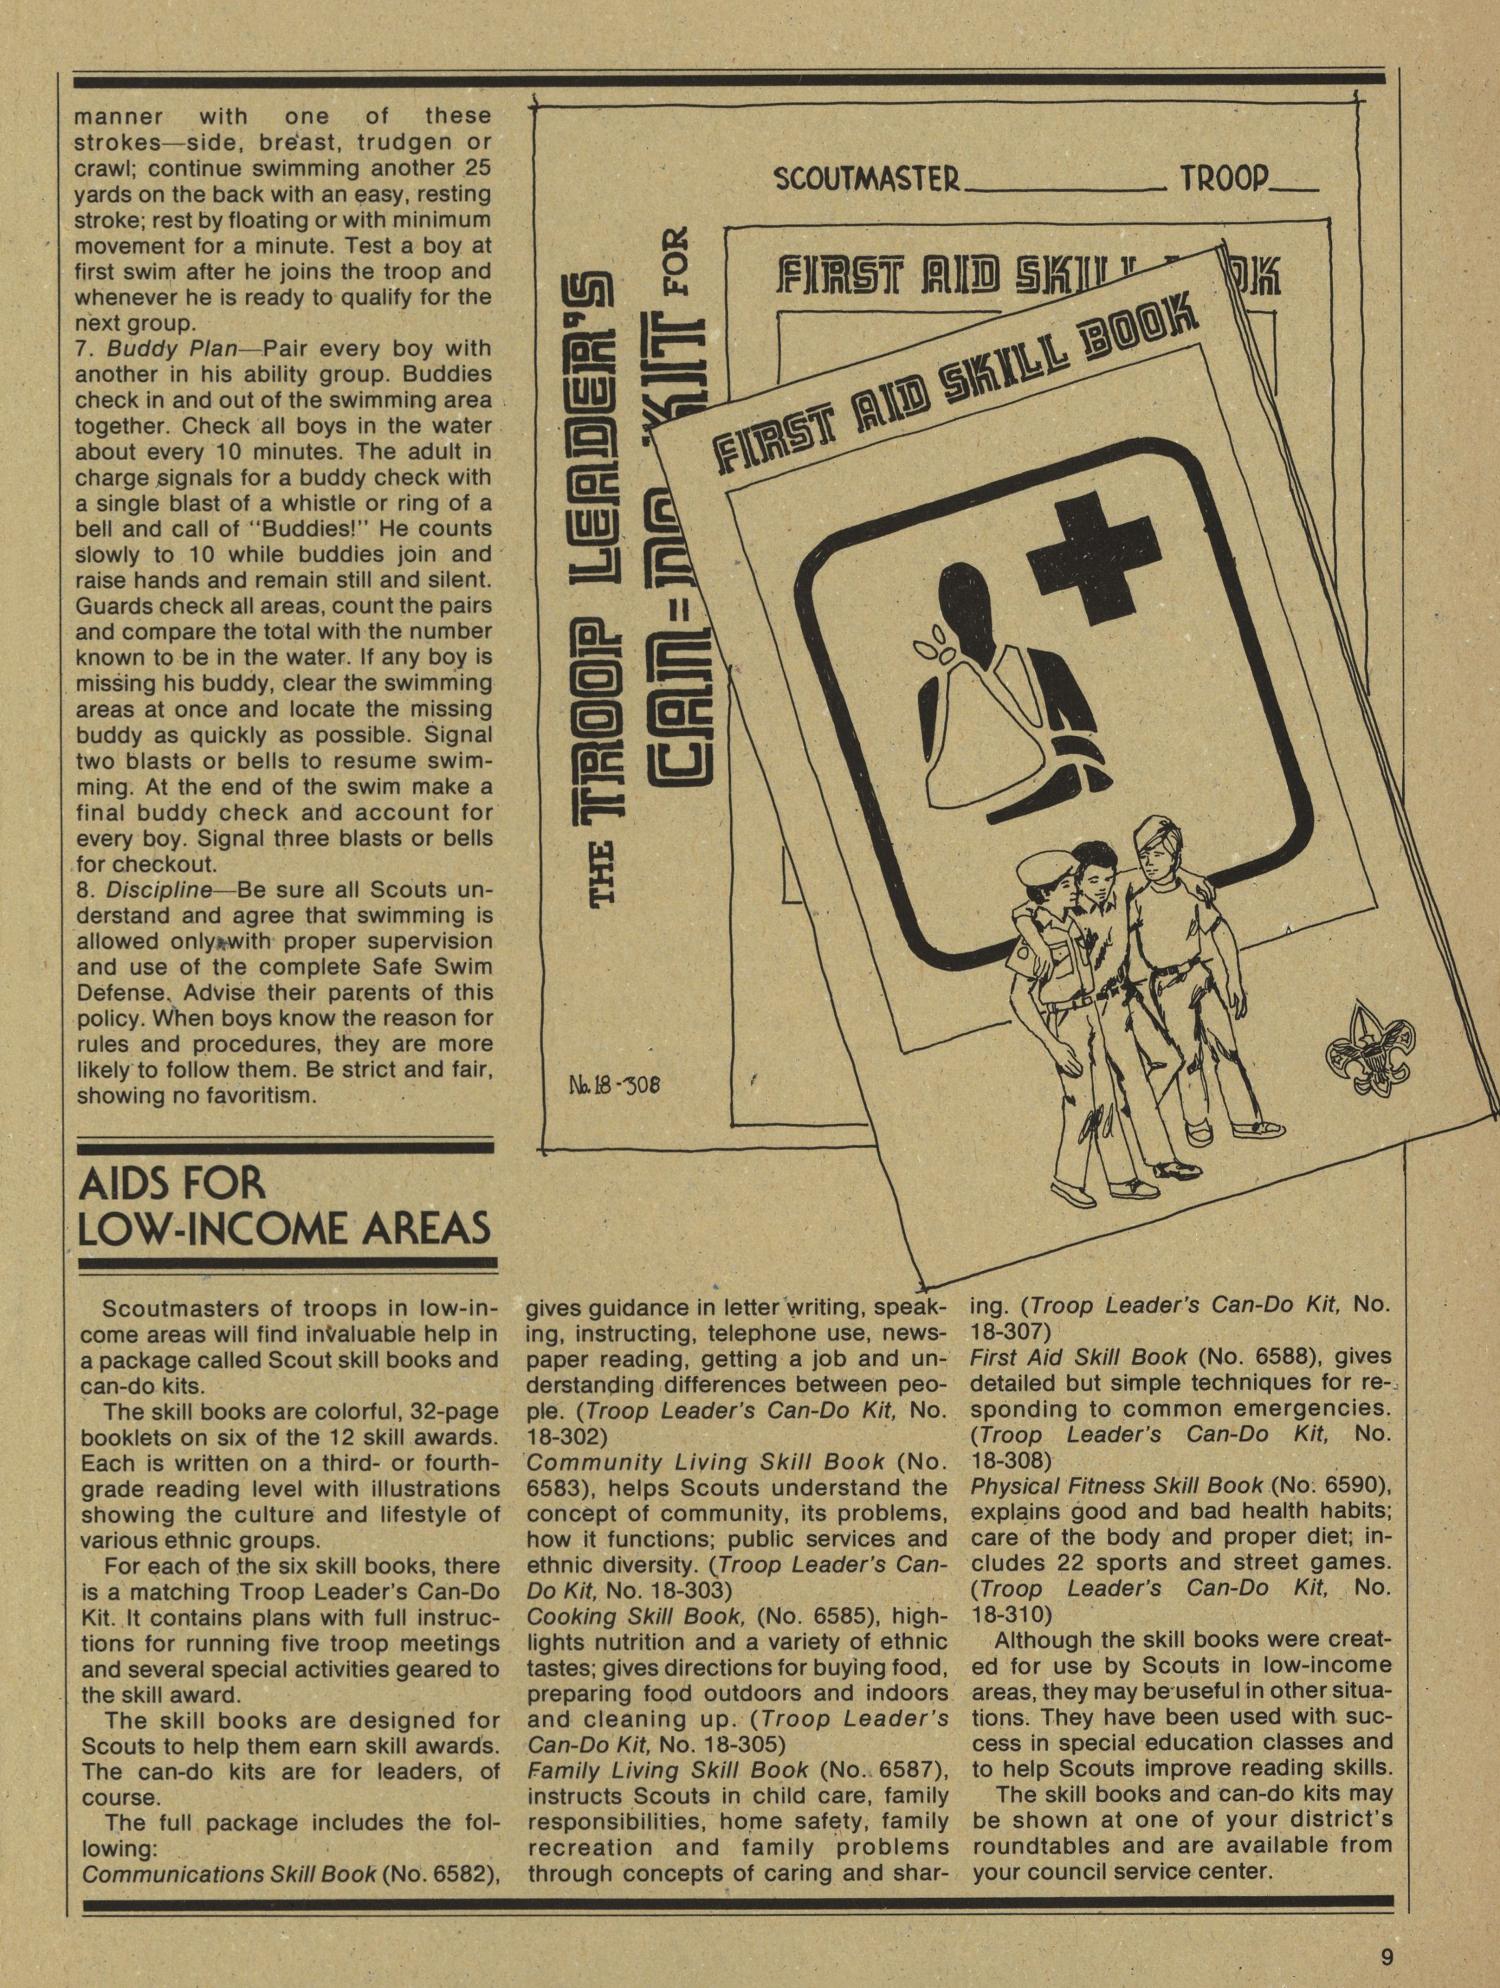 Scouting, Volume 65, Number 3, May-June 1977
                                                
                                                    9
                                                